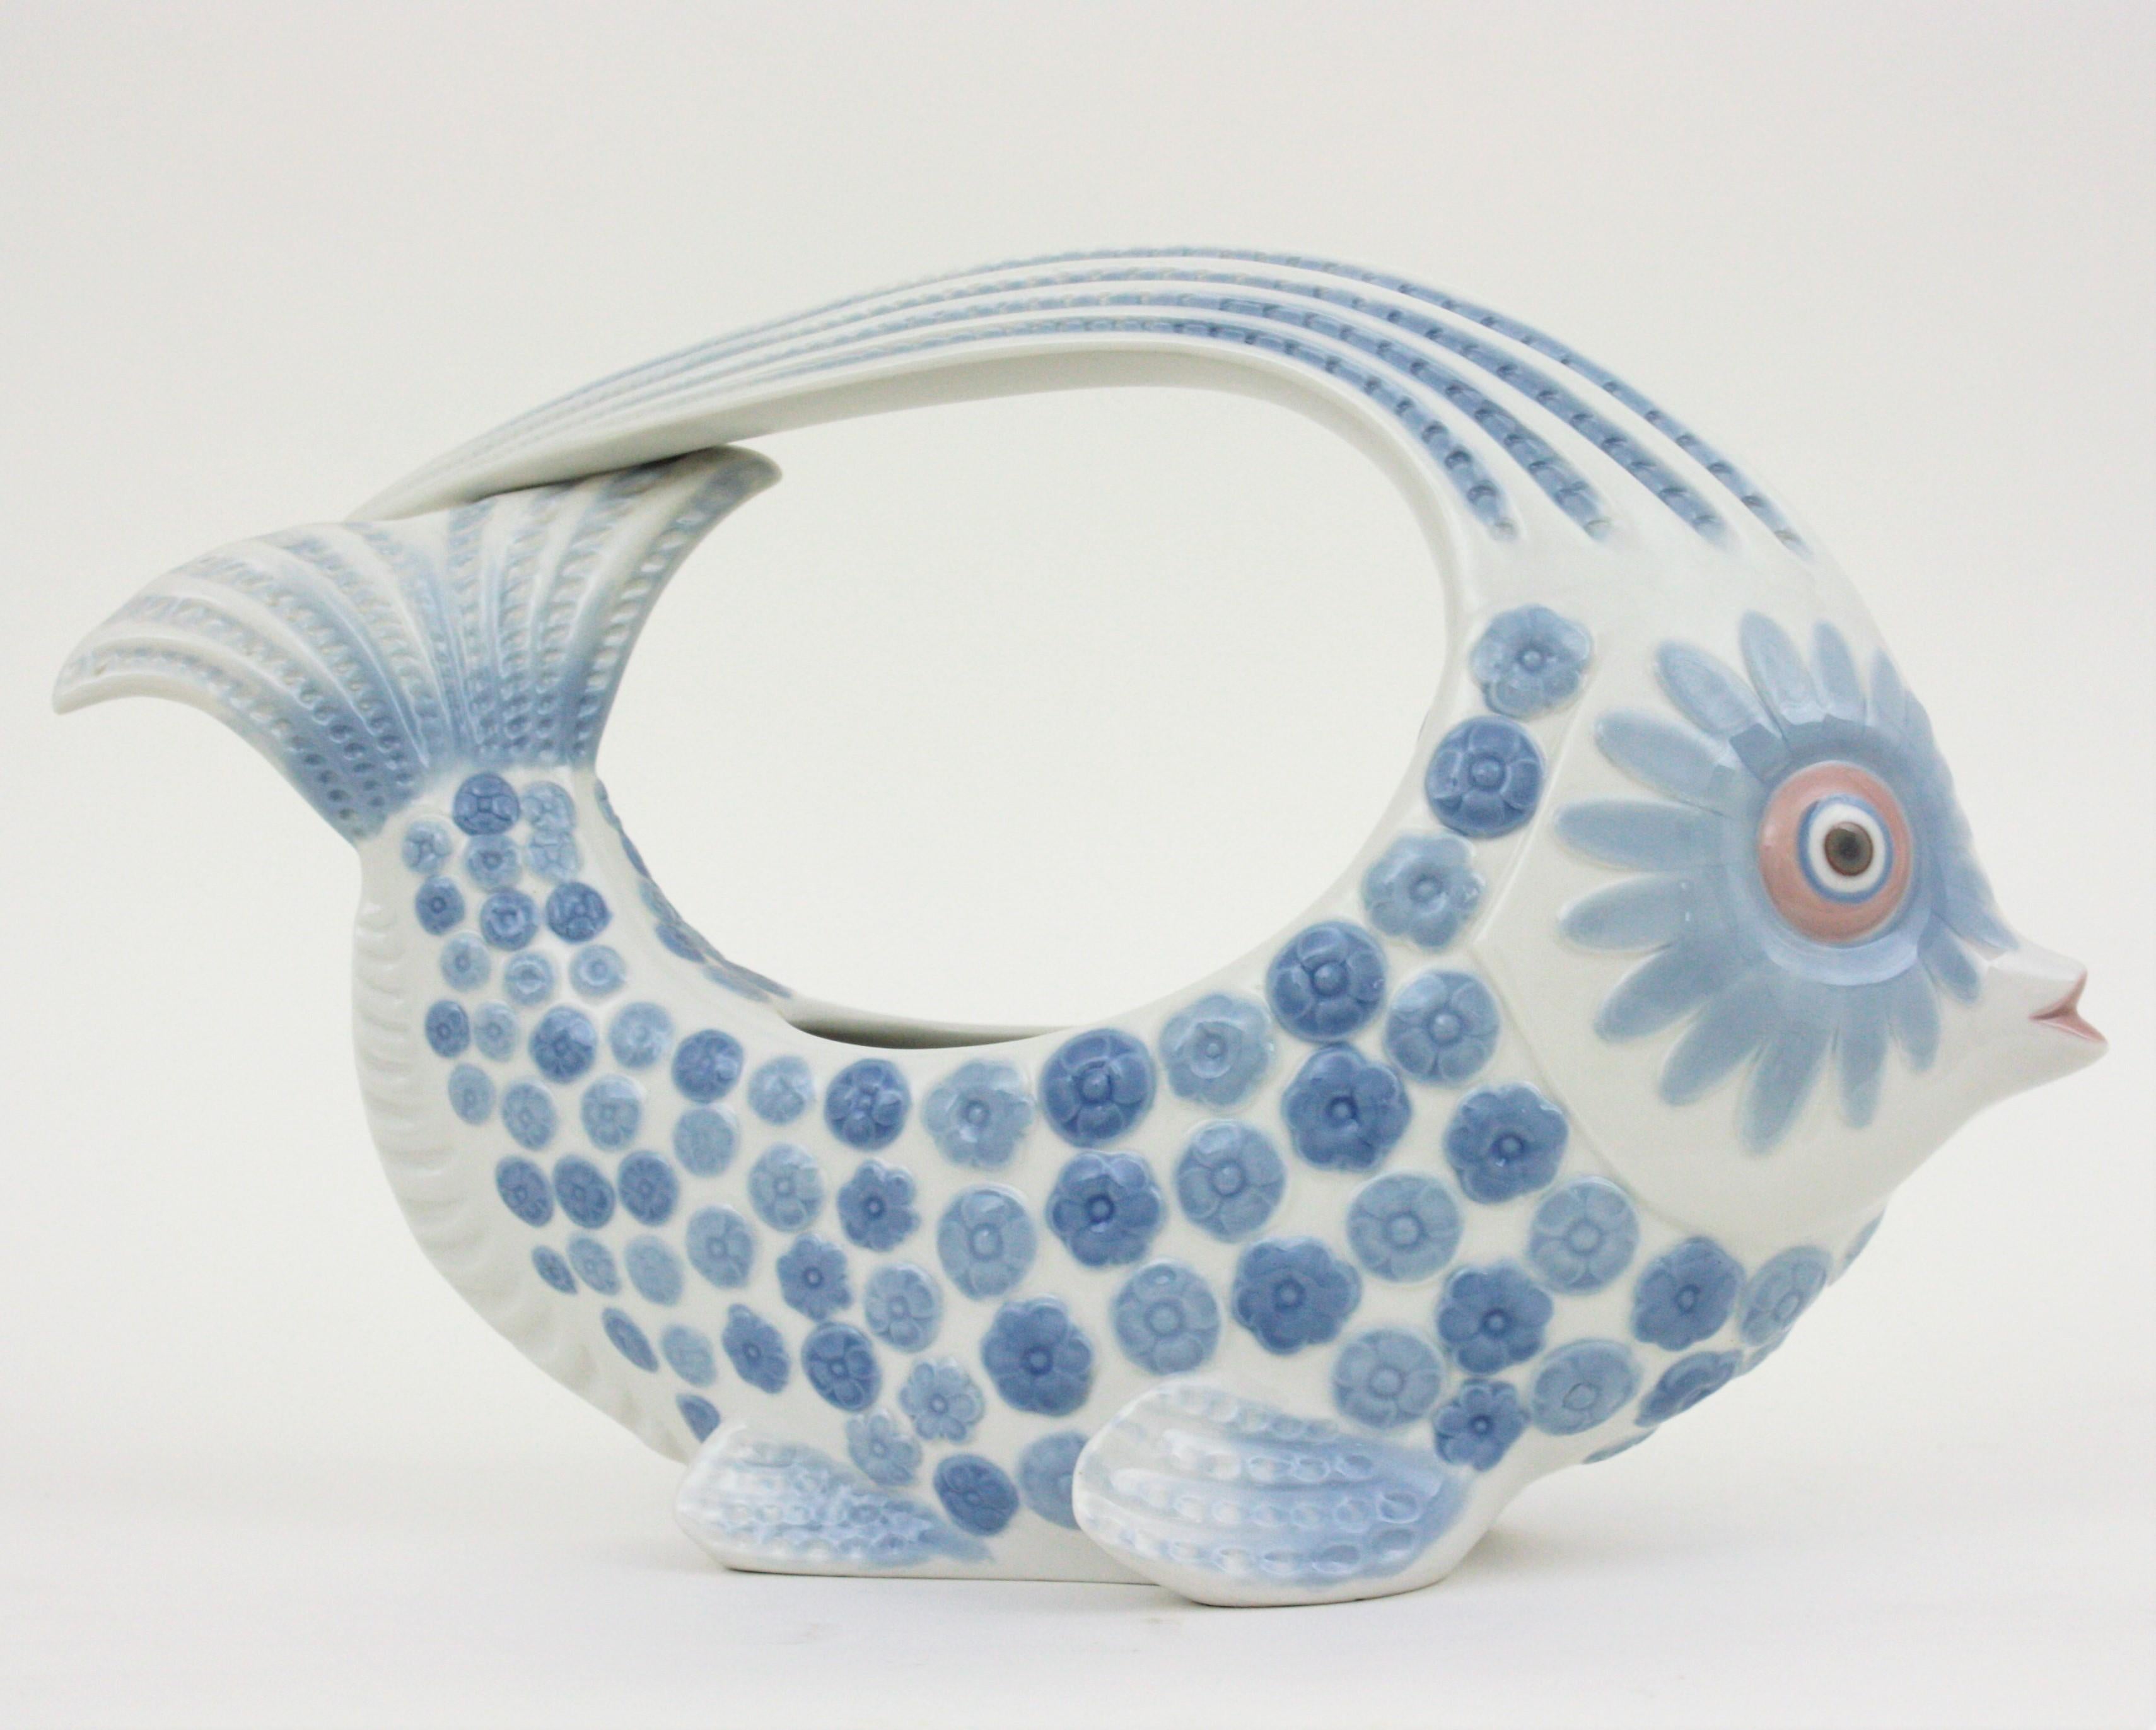 A beautiful colorful porcelain fish figure centerpiece or vase designed by Vicente Martinez and manufactured by Lladró.
It also can be used as a planter.
The design and the blue tones make this centerpiece highly decorative. This piece is in mint